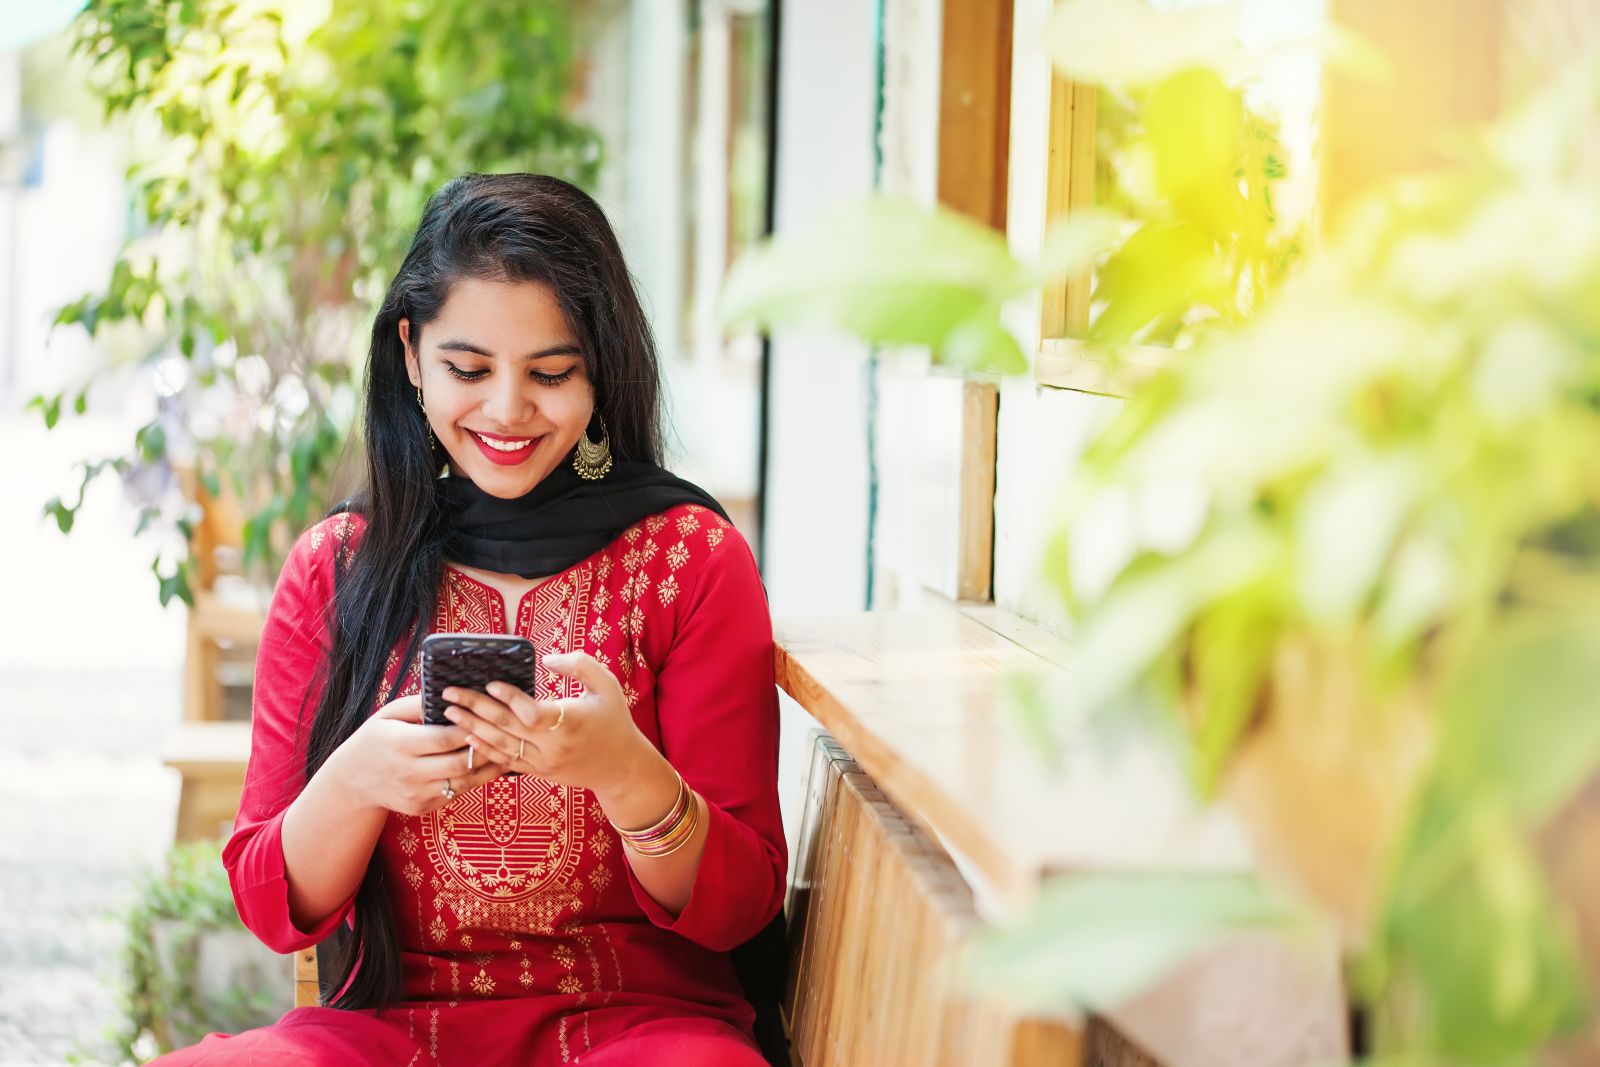 Young Indian woman visiting app store on her smartphone